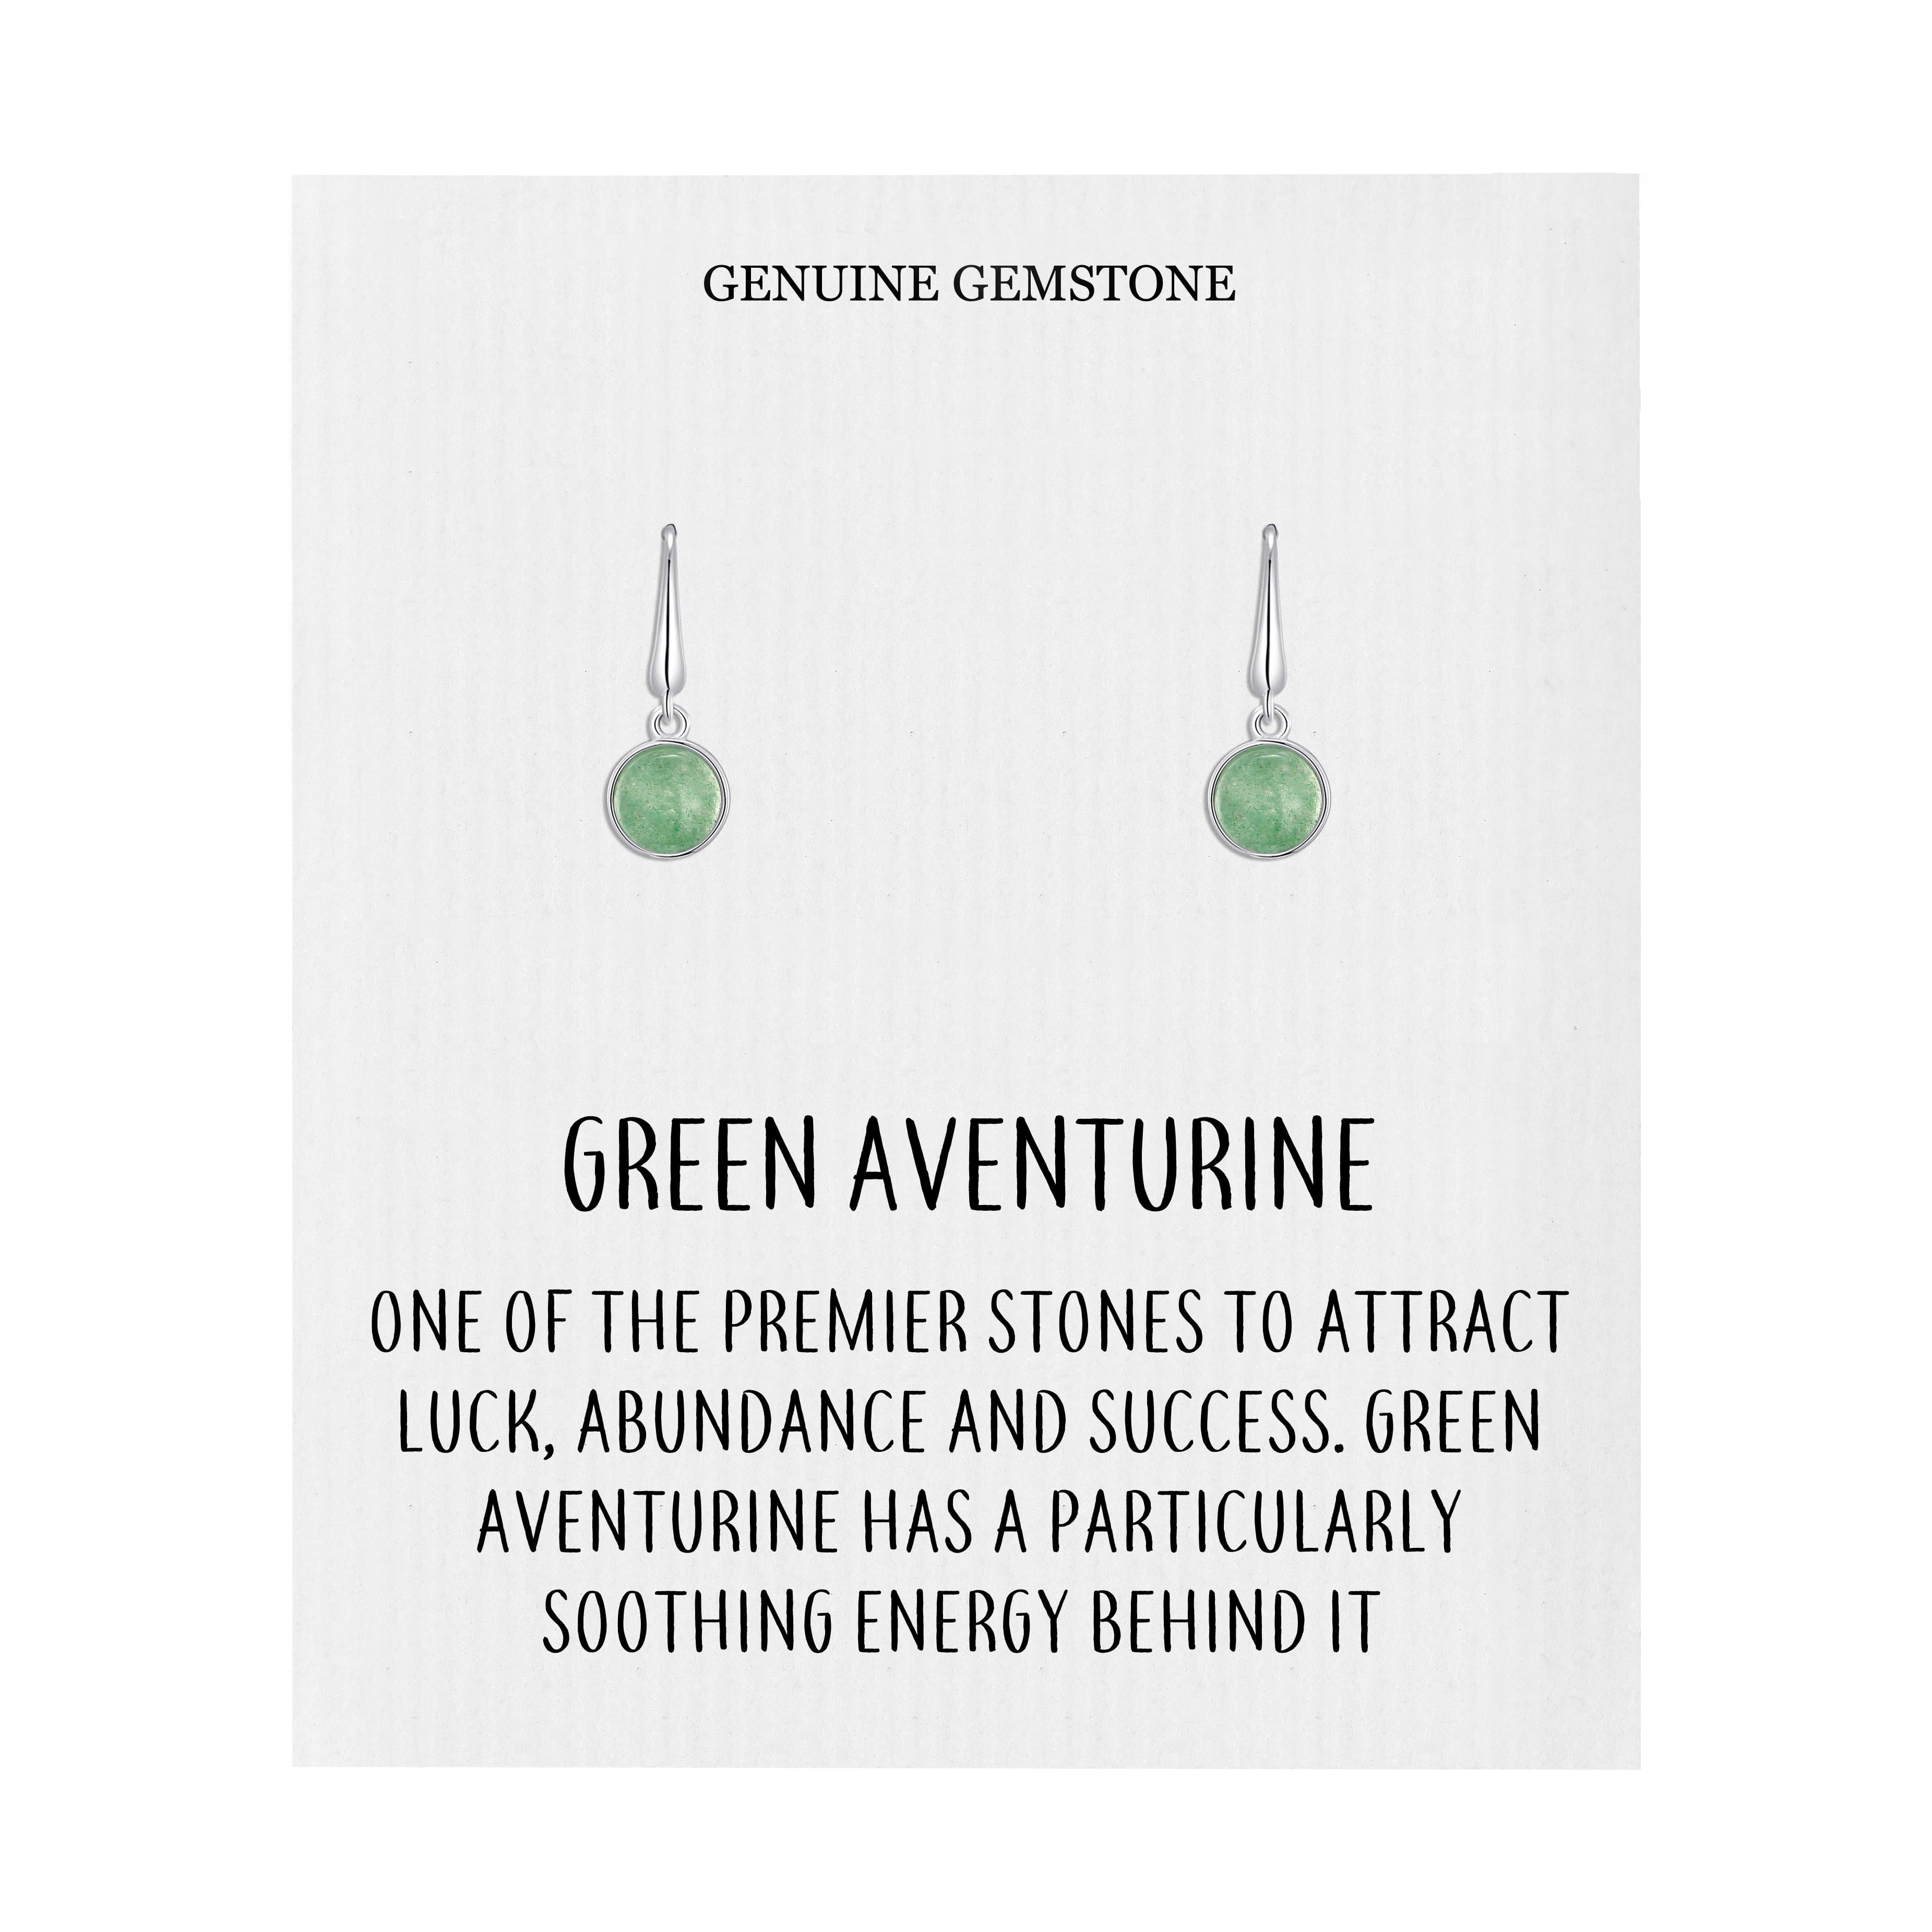 Green Aventurine Drop Earrings with Quote Card